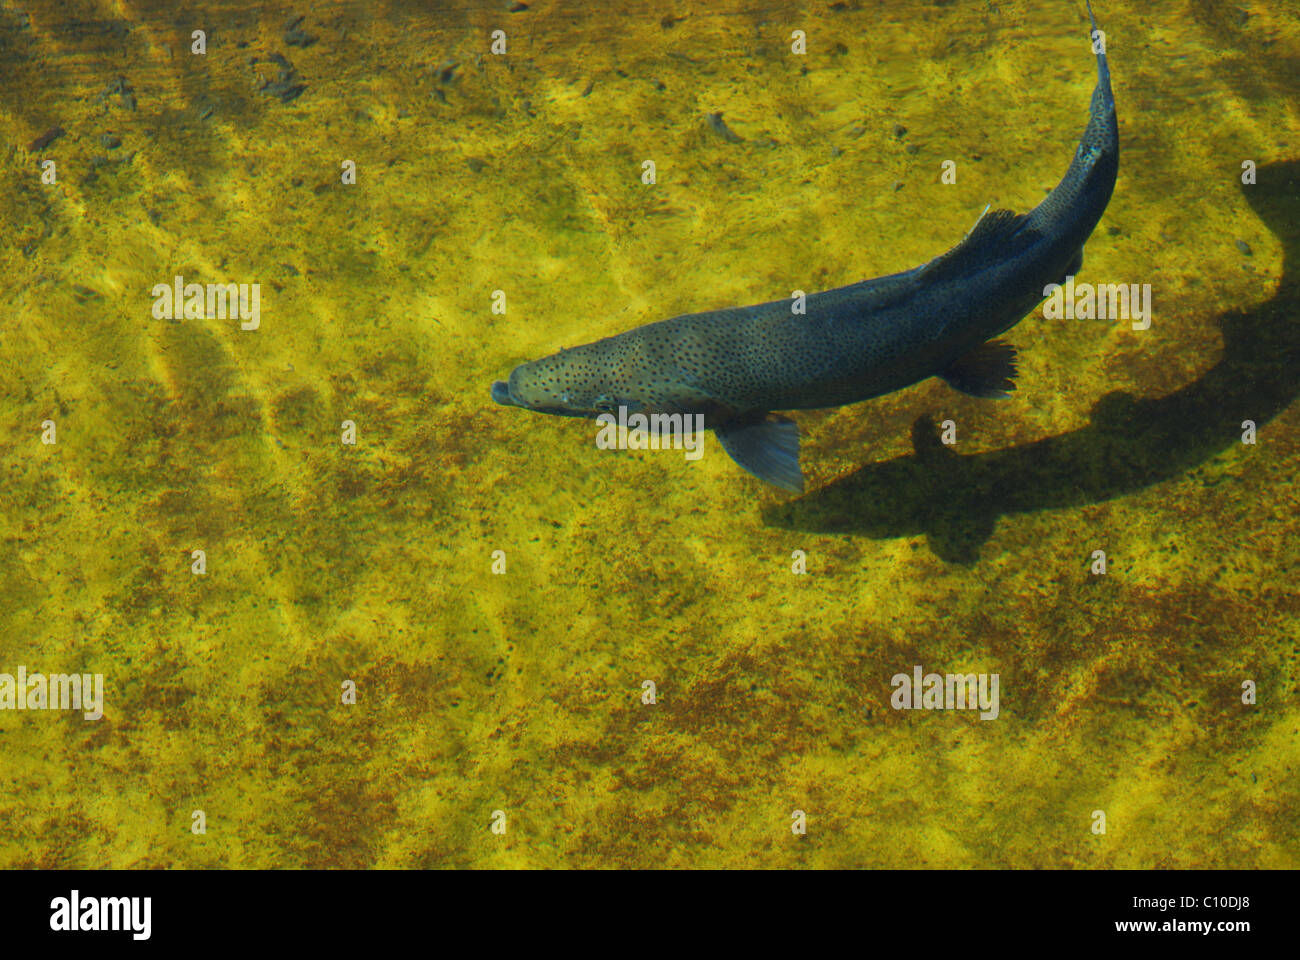 Steelhead trout swimming in managed hatchery waters. Stock Photo